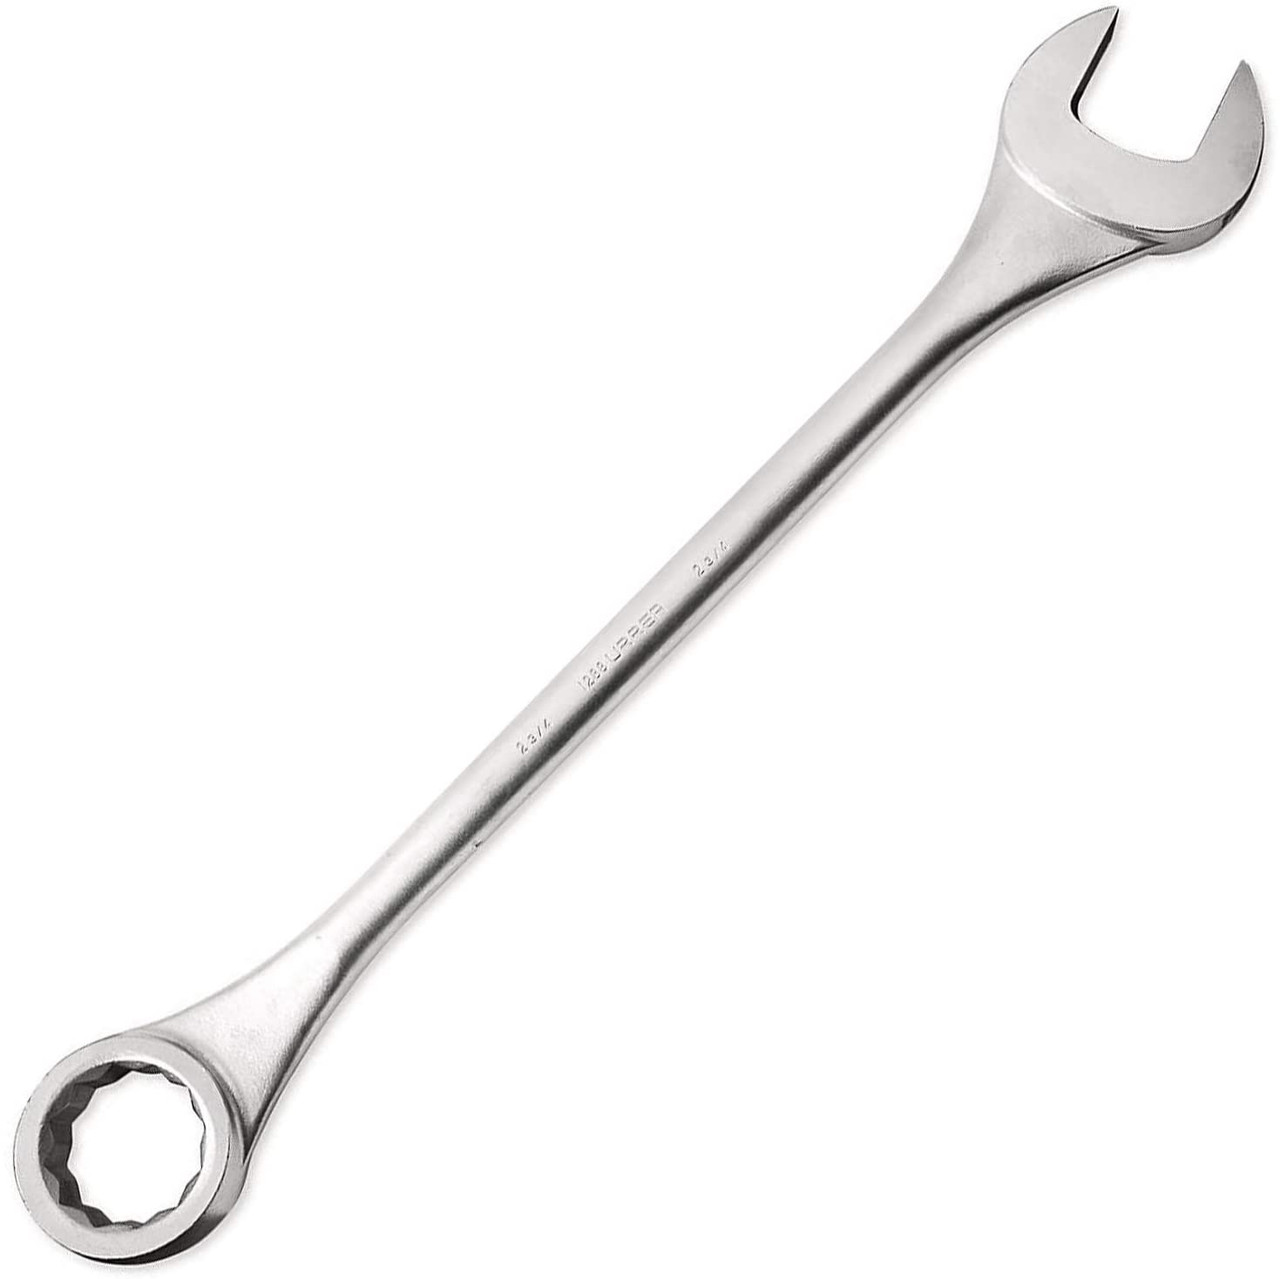 Satin finish combination wrench, Size: 2-3/4, 12 point, Tool Length: 33-1/2"